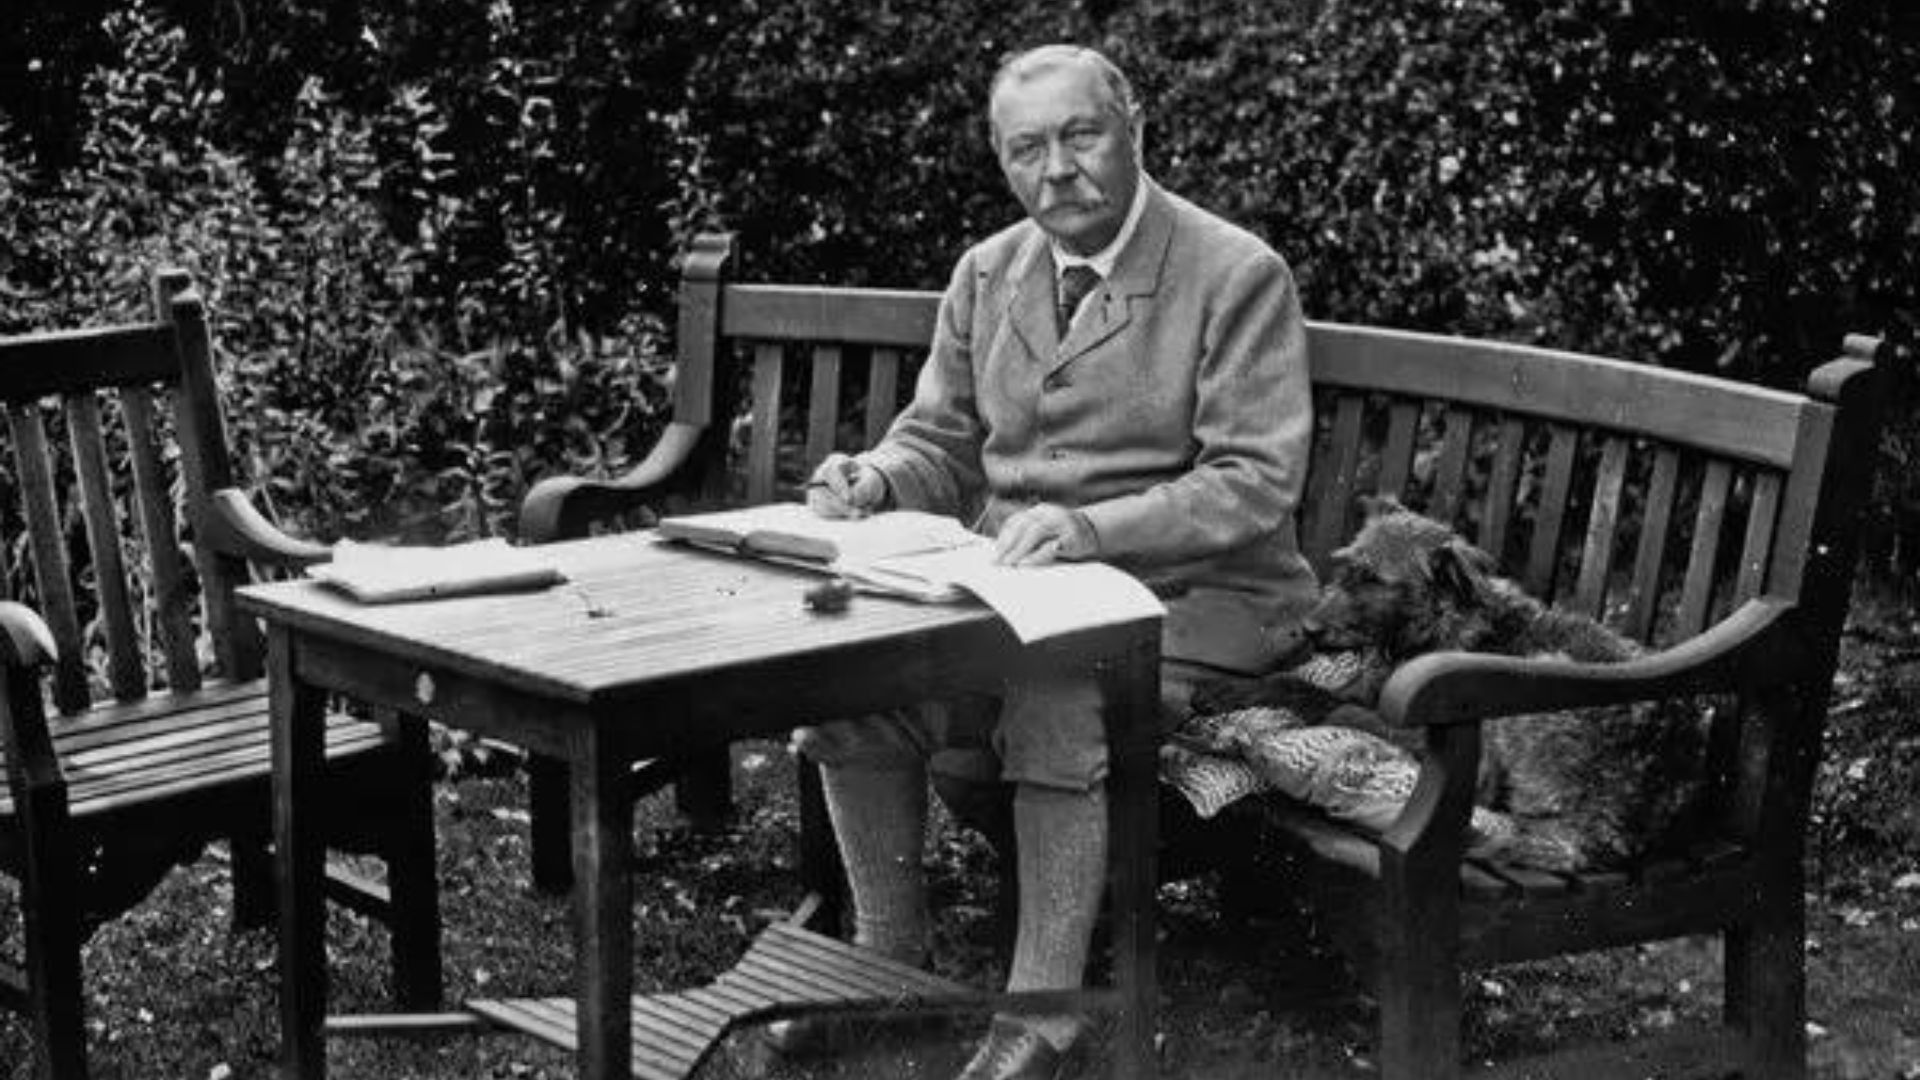 Sir Arthur Conan Doyle Sitting On A Wooden Bench With His Dog